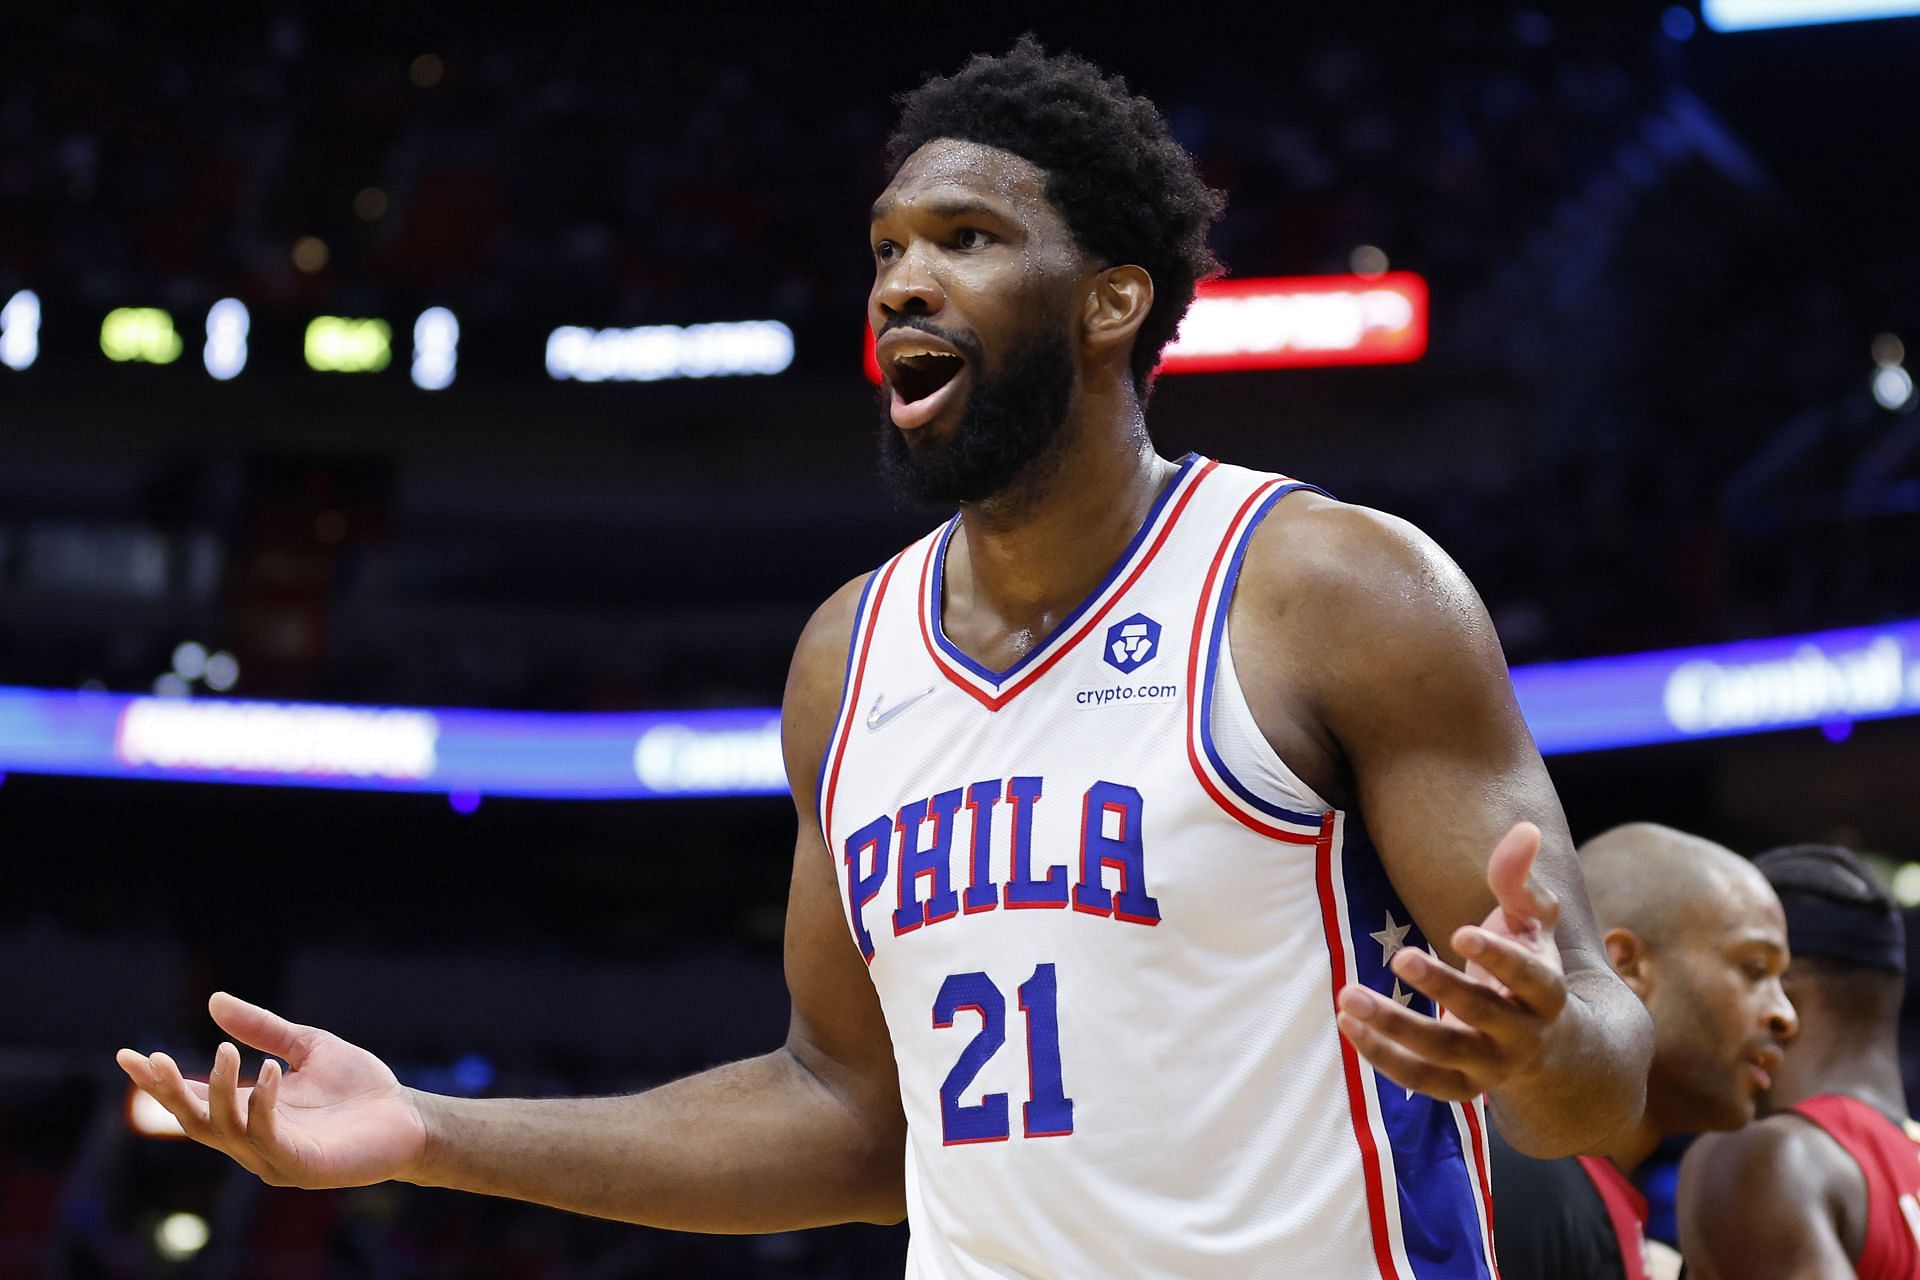 Joel Embiid posted 38 points and 12 rebounds as the Philadelphia 76ers beat the San Antonio Spurs